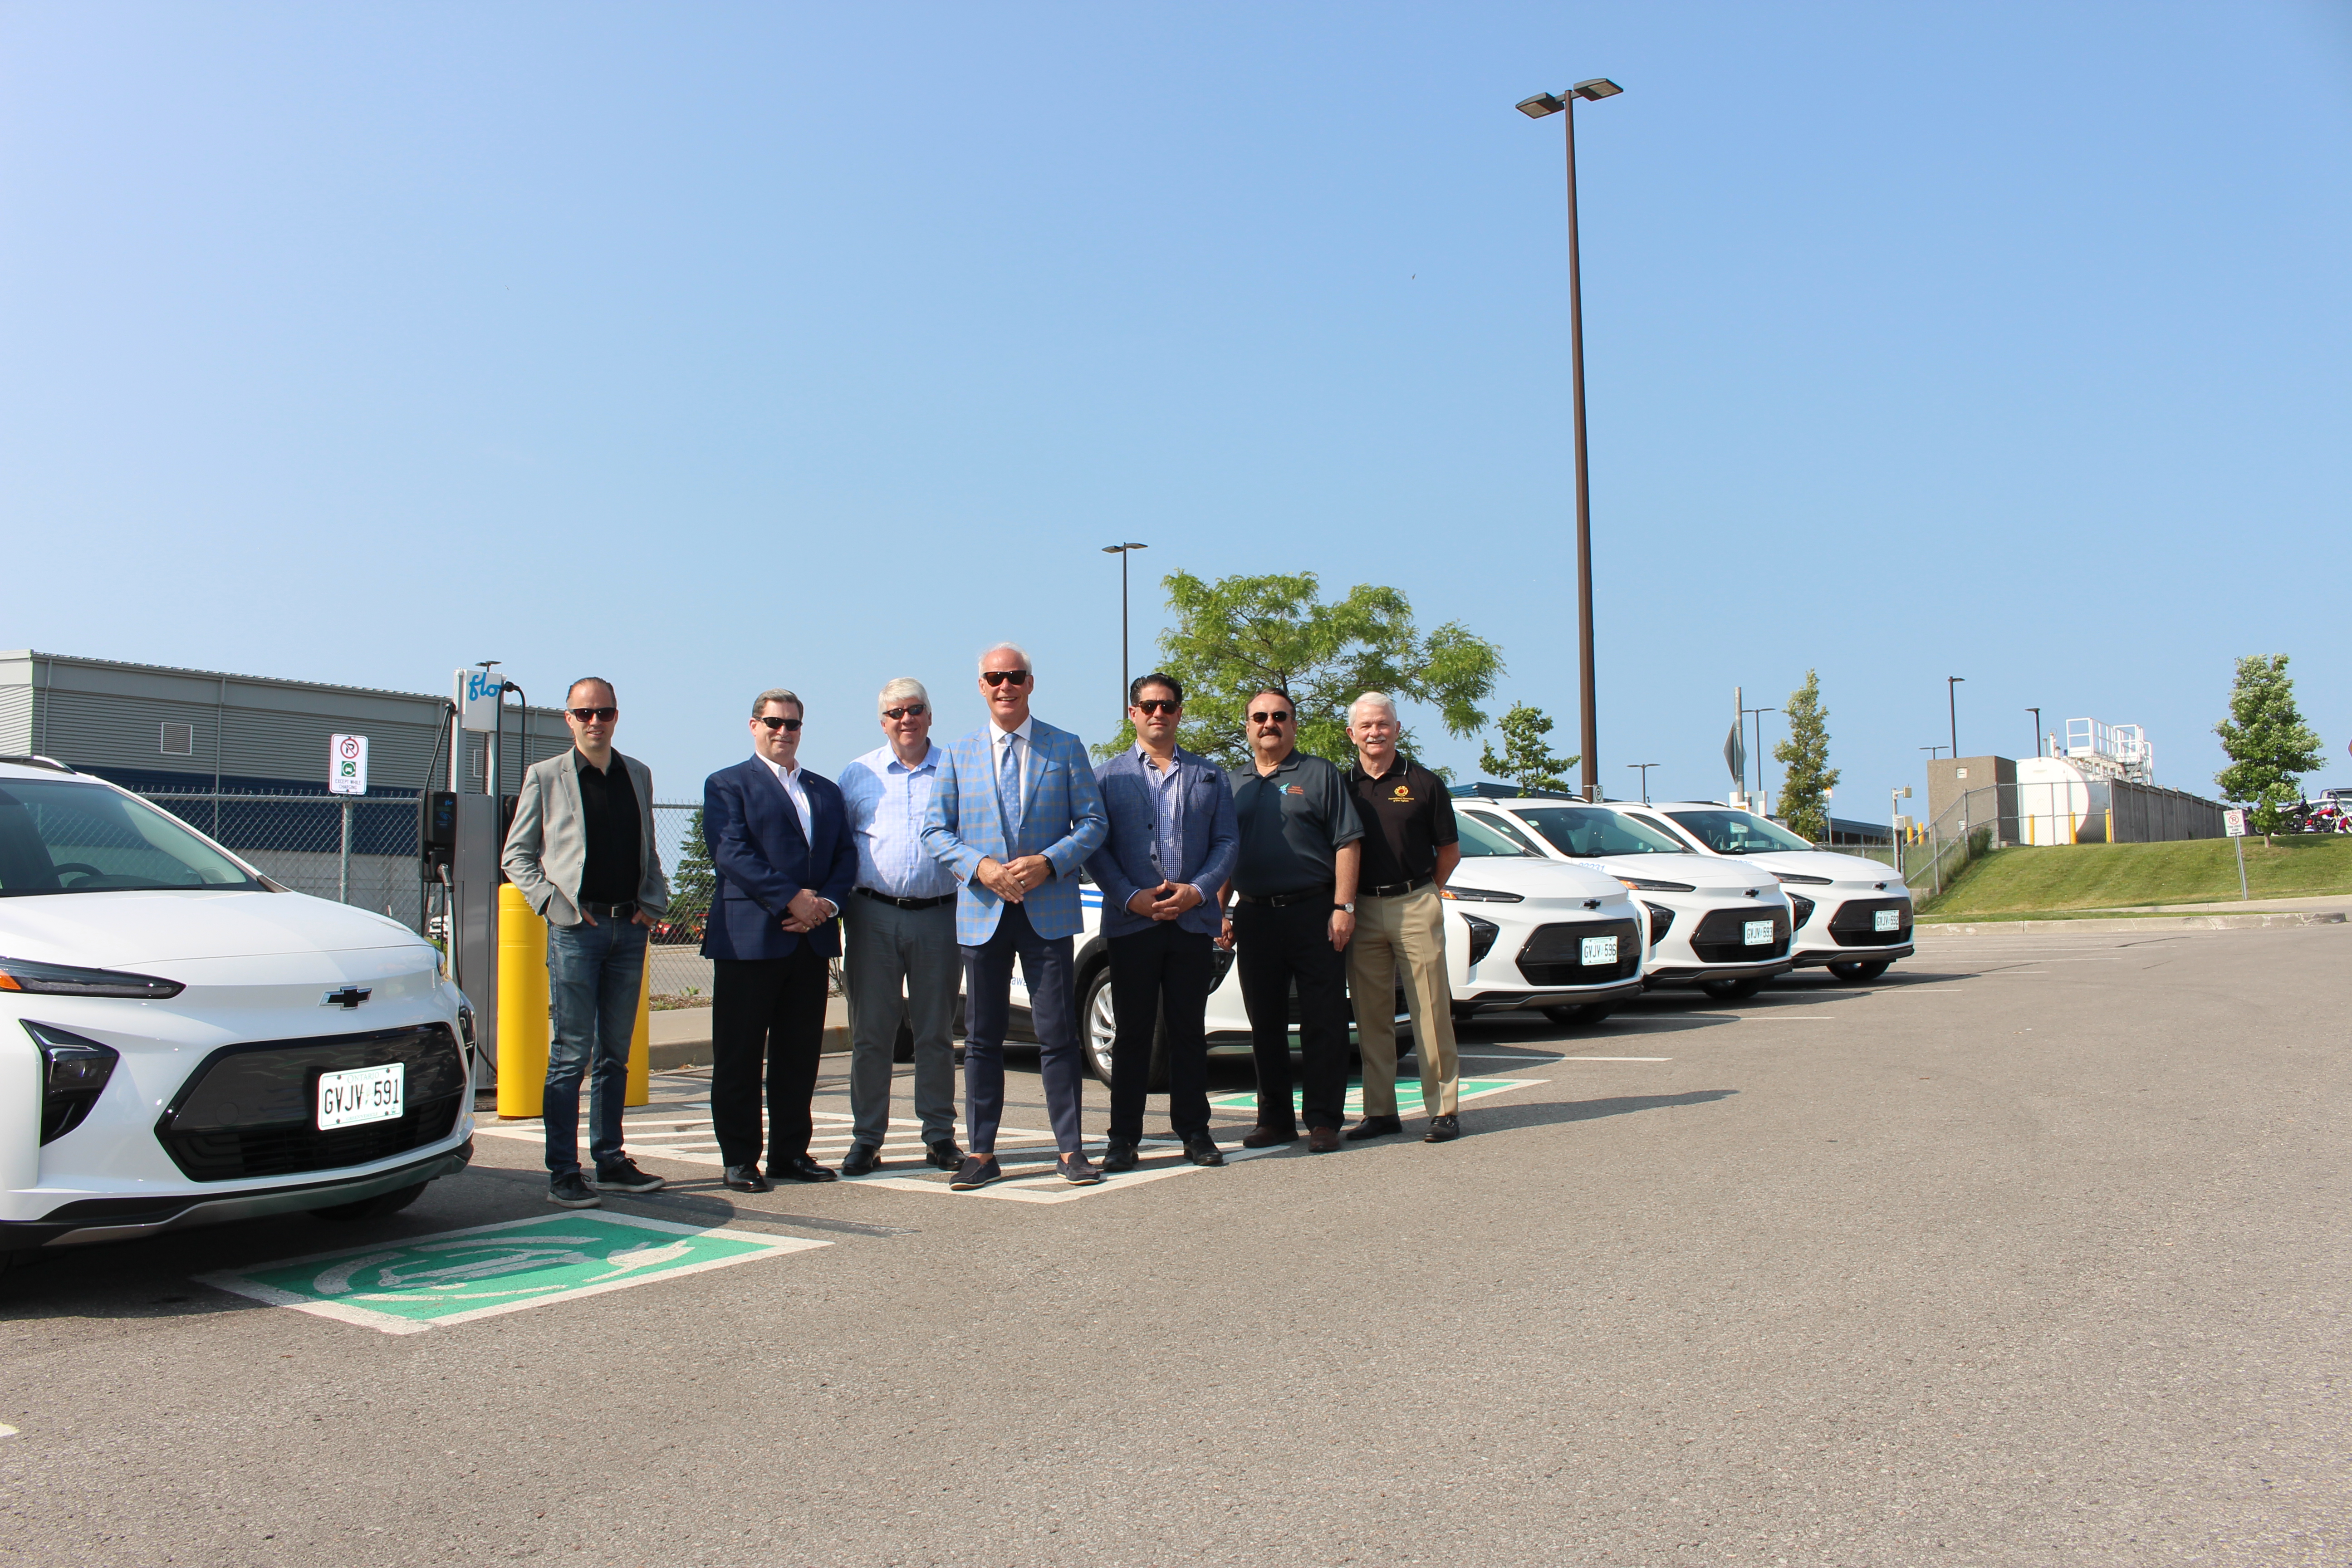 Members of Council and representatives from Ontario Motor Sales were on hand to mark the introduction of the first seven fully-electric vehicles to the City of Oshawa’s fleet. 